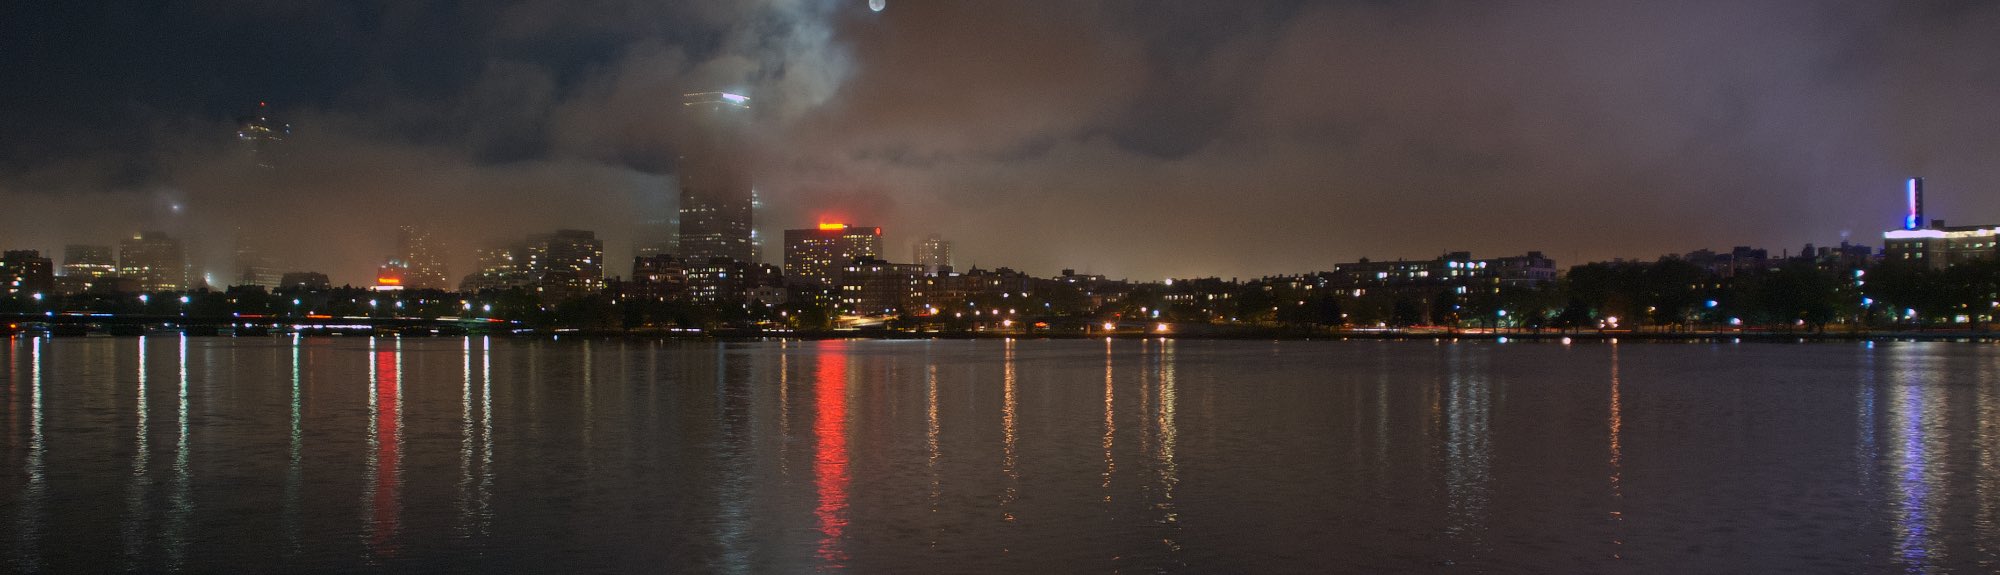 Moonlit fog, the Boston skyline, and the Charles River